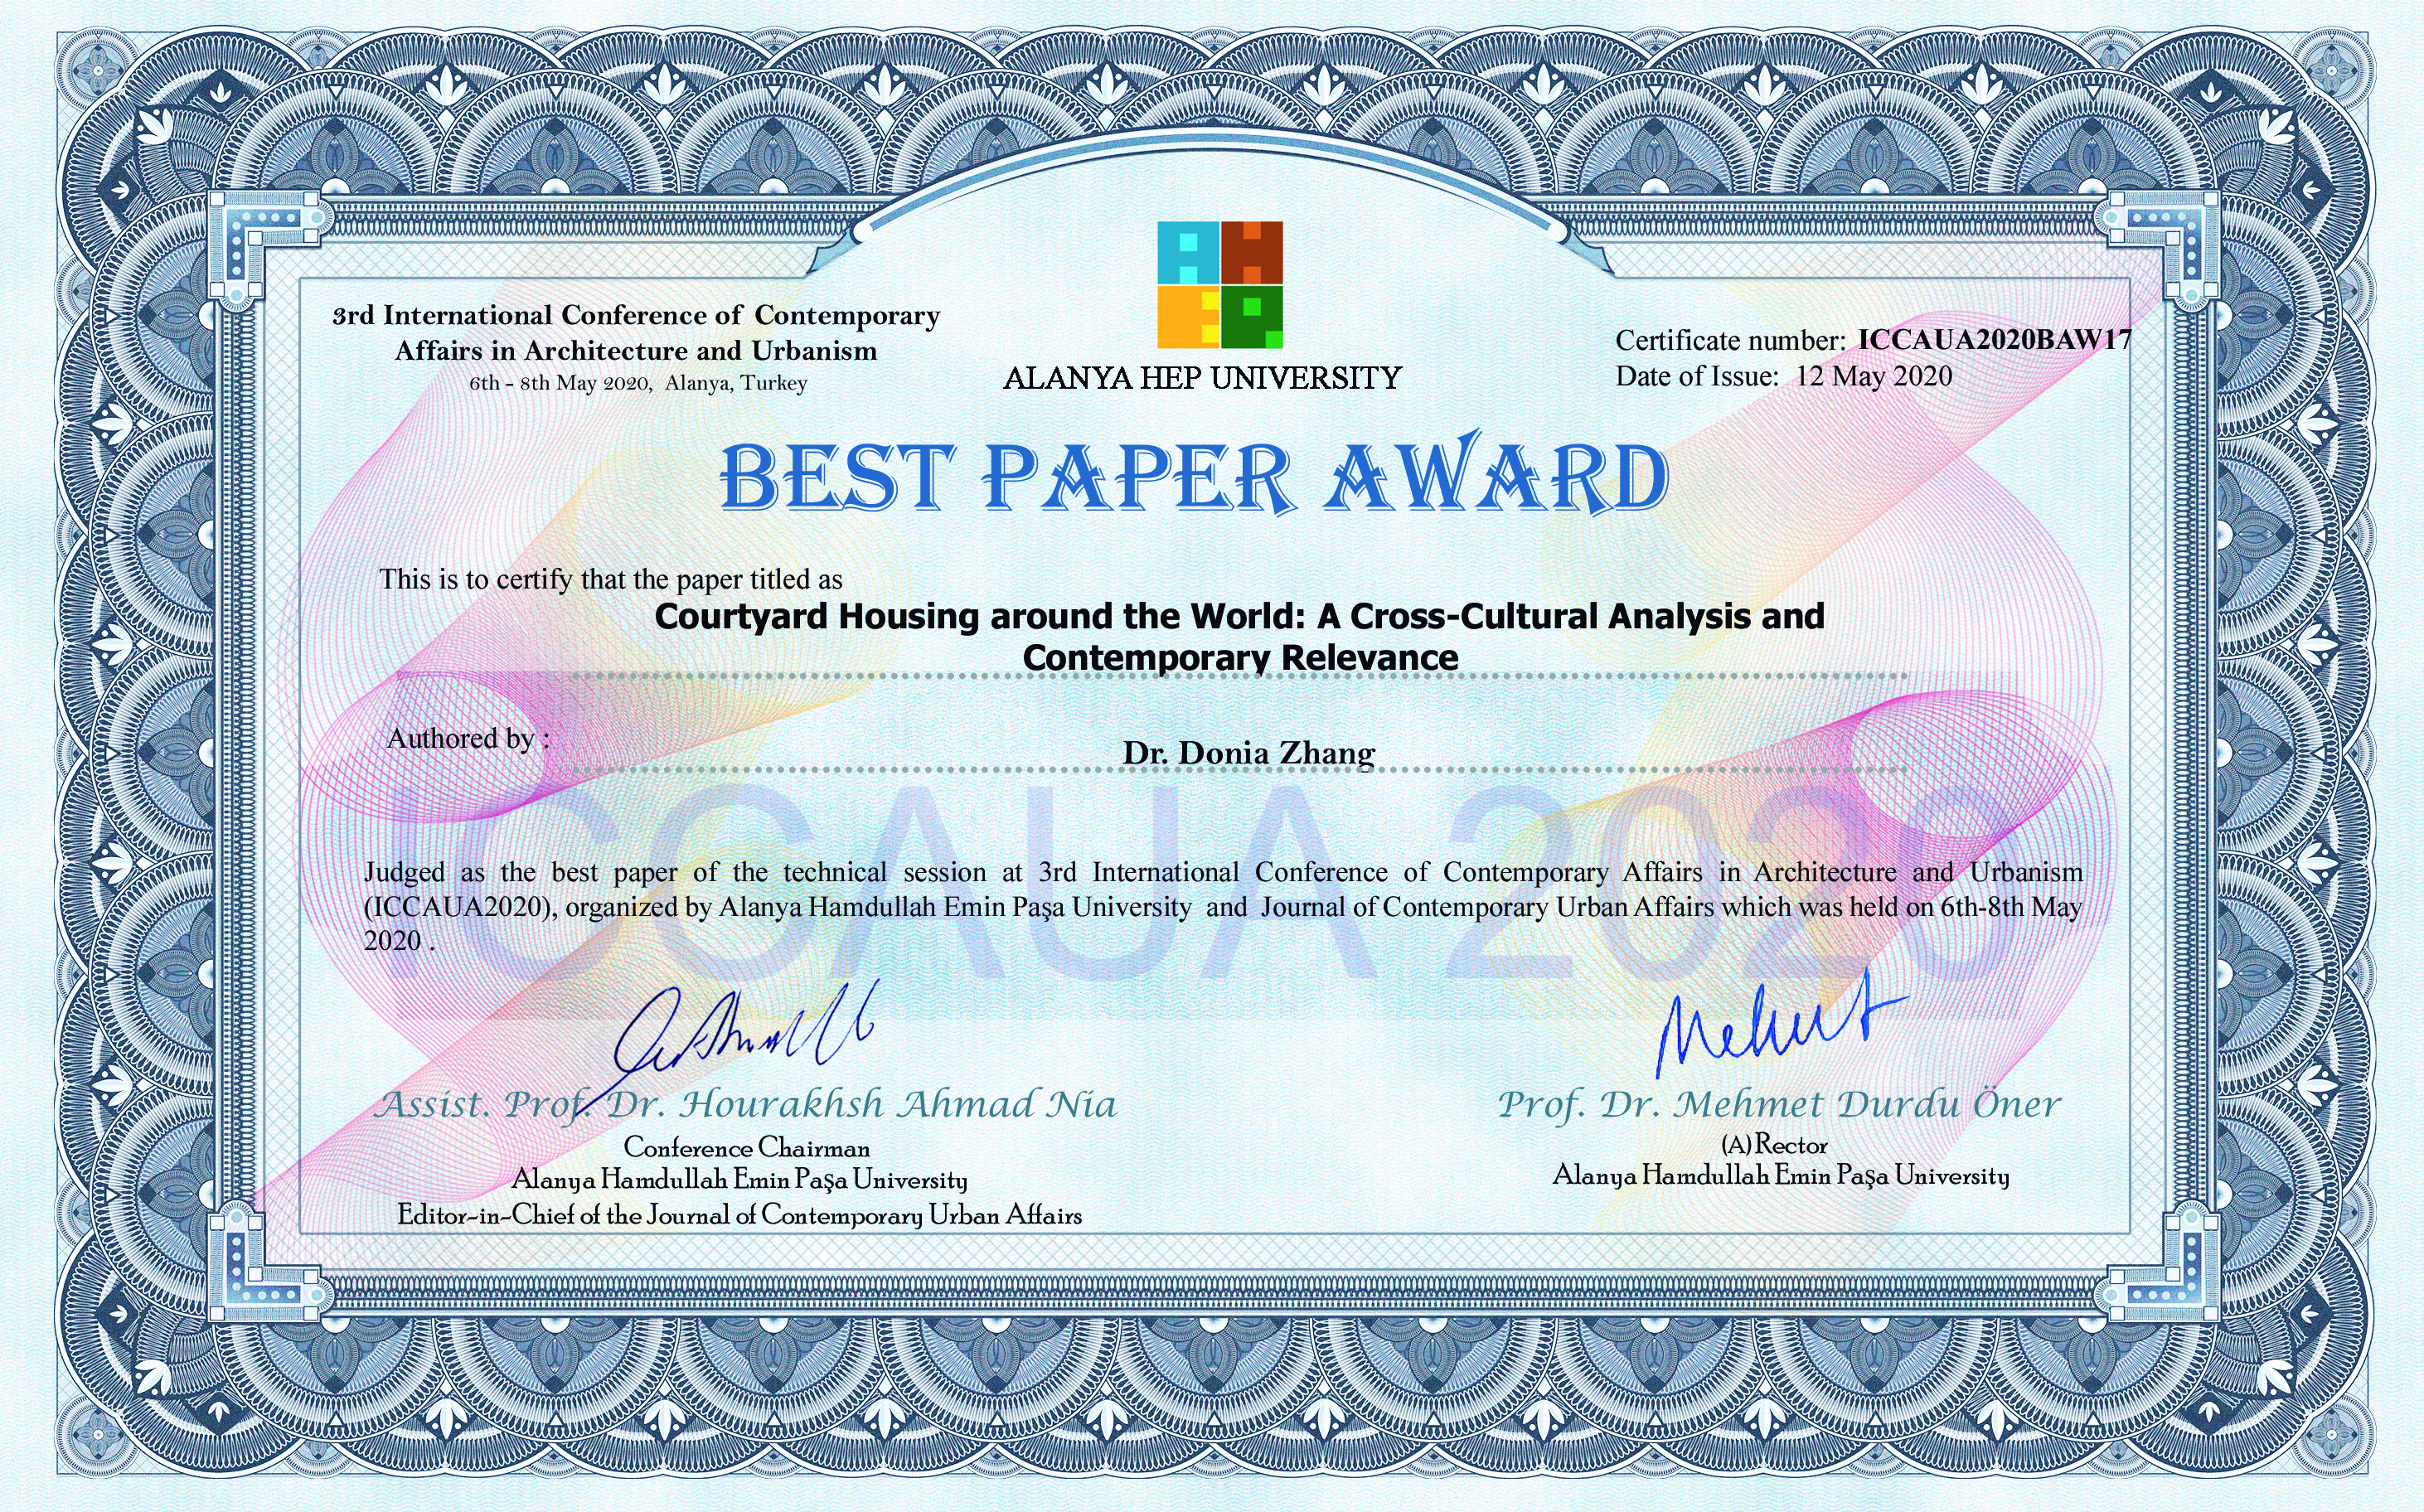 ICCAUA2020BAW17_Dr_Donia_Zhang_Best_Paper_Award_Certificate